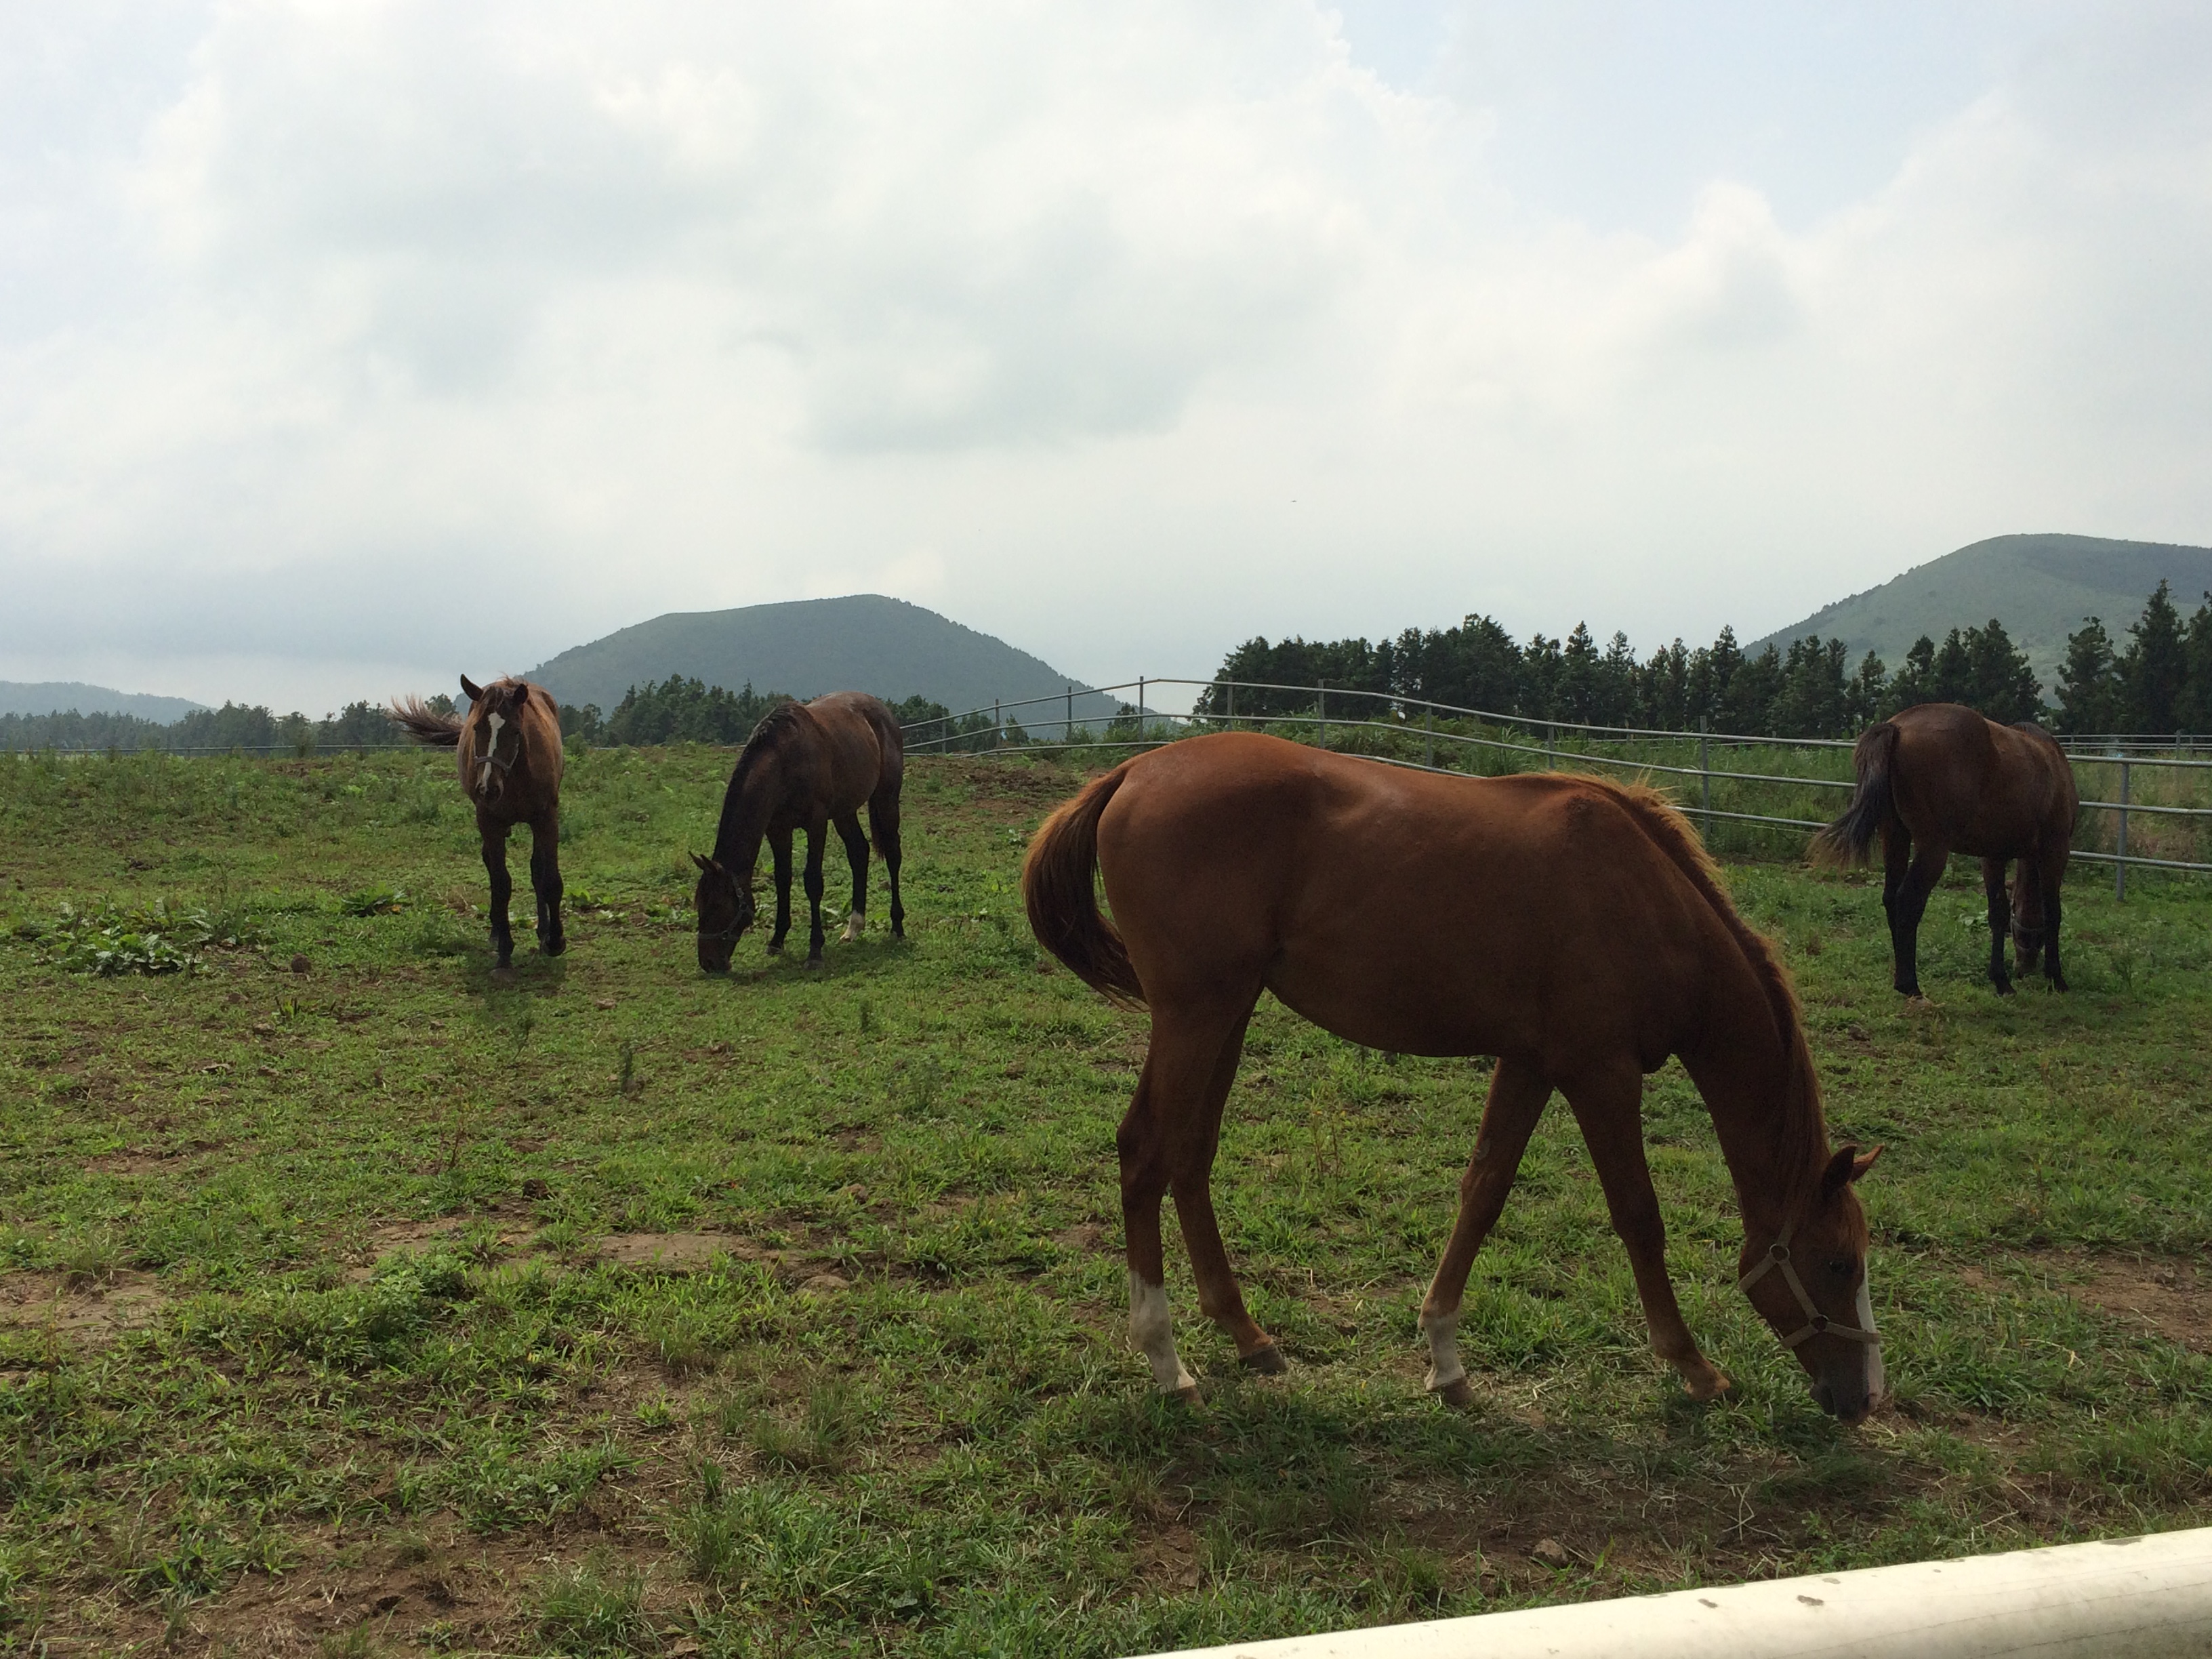 Nokwon Farm on Jeju: it may lack the rich vegetation of Kentucky, but the breeding industry in South Korea is definitely going places. Photo: Katherine Ford